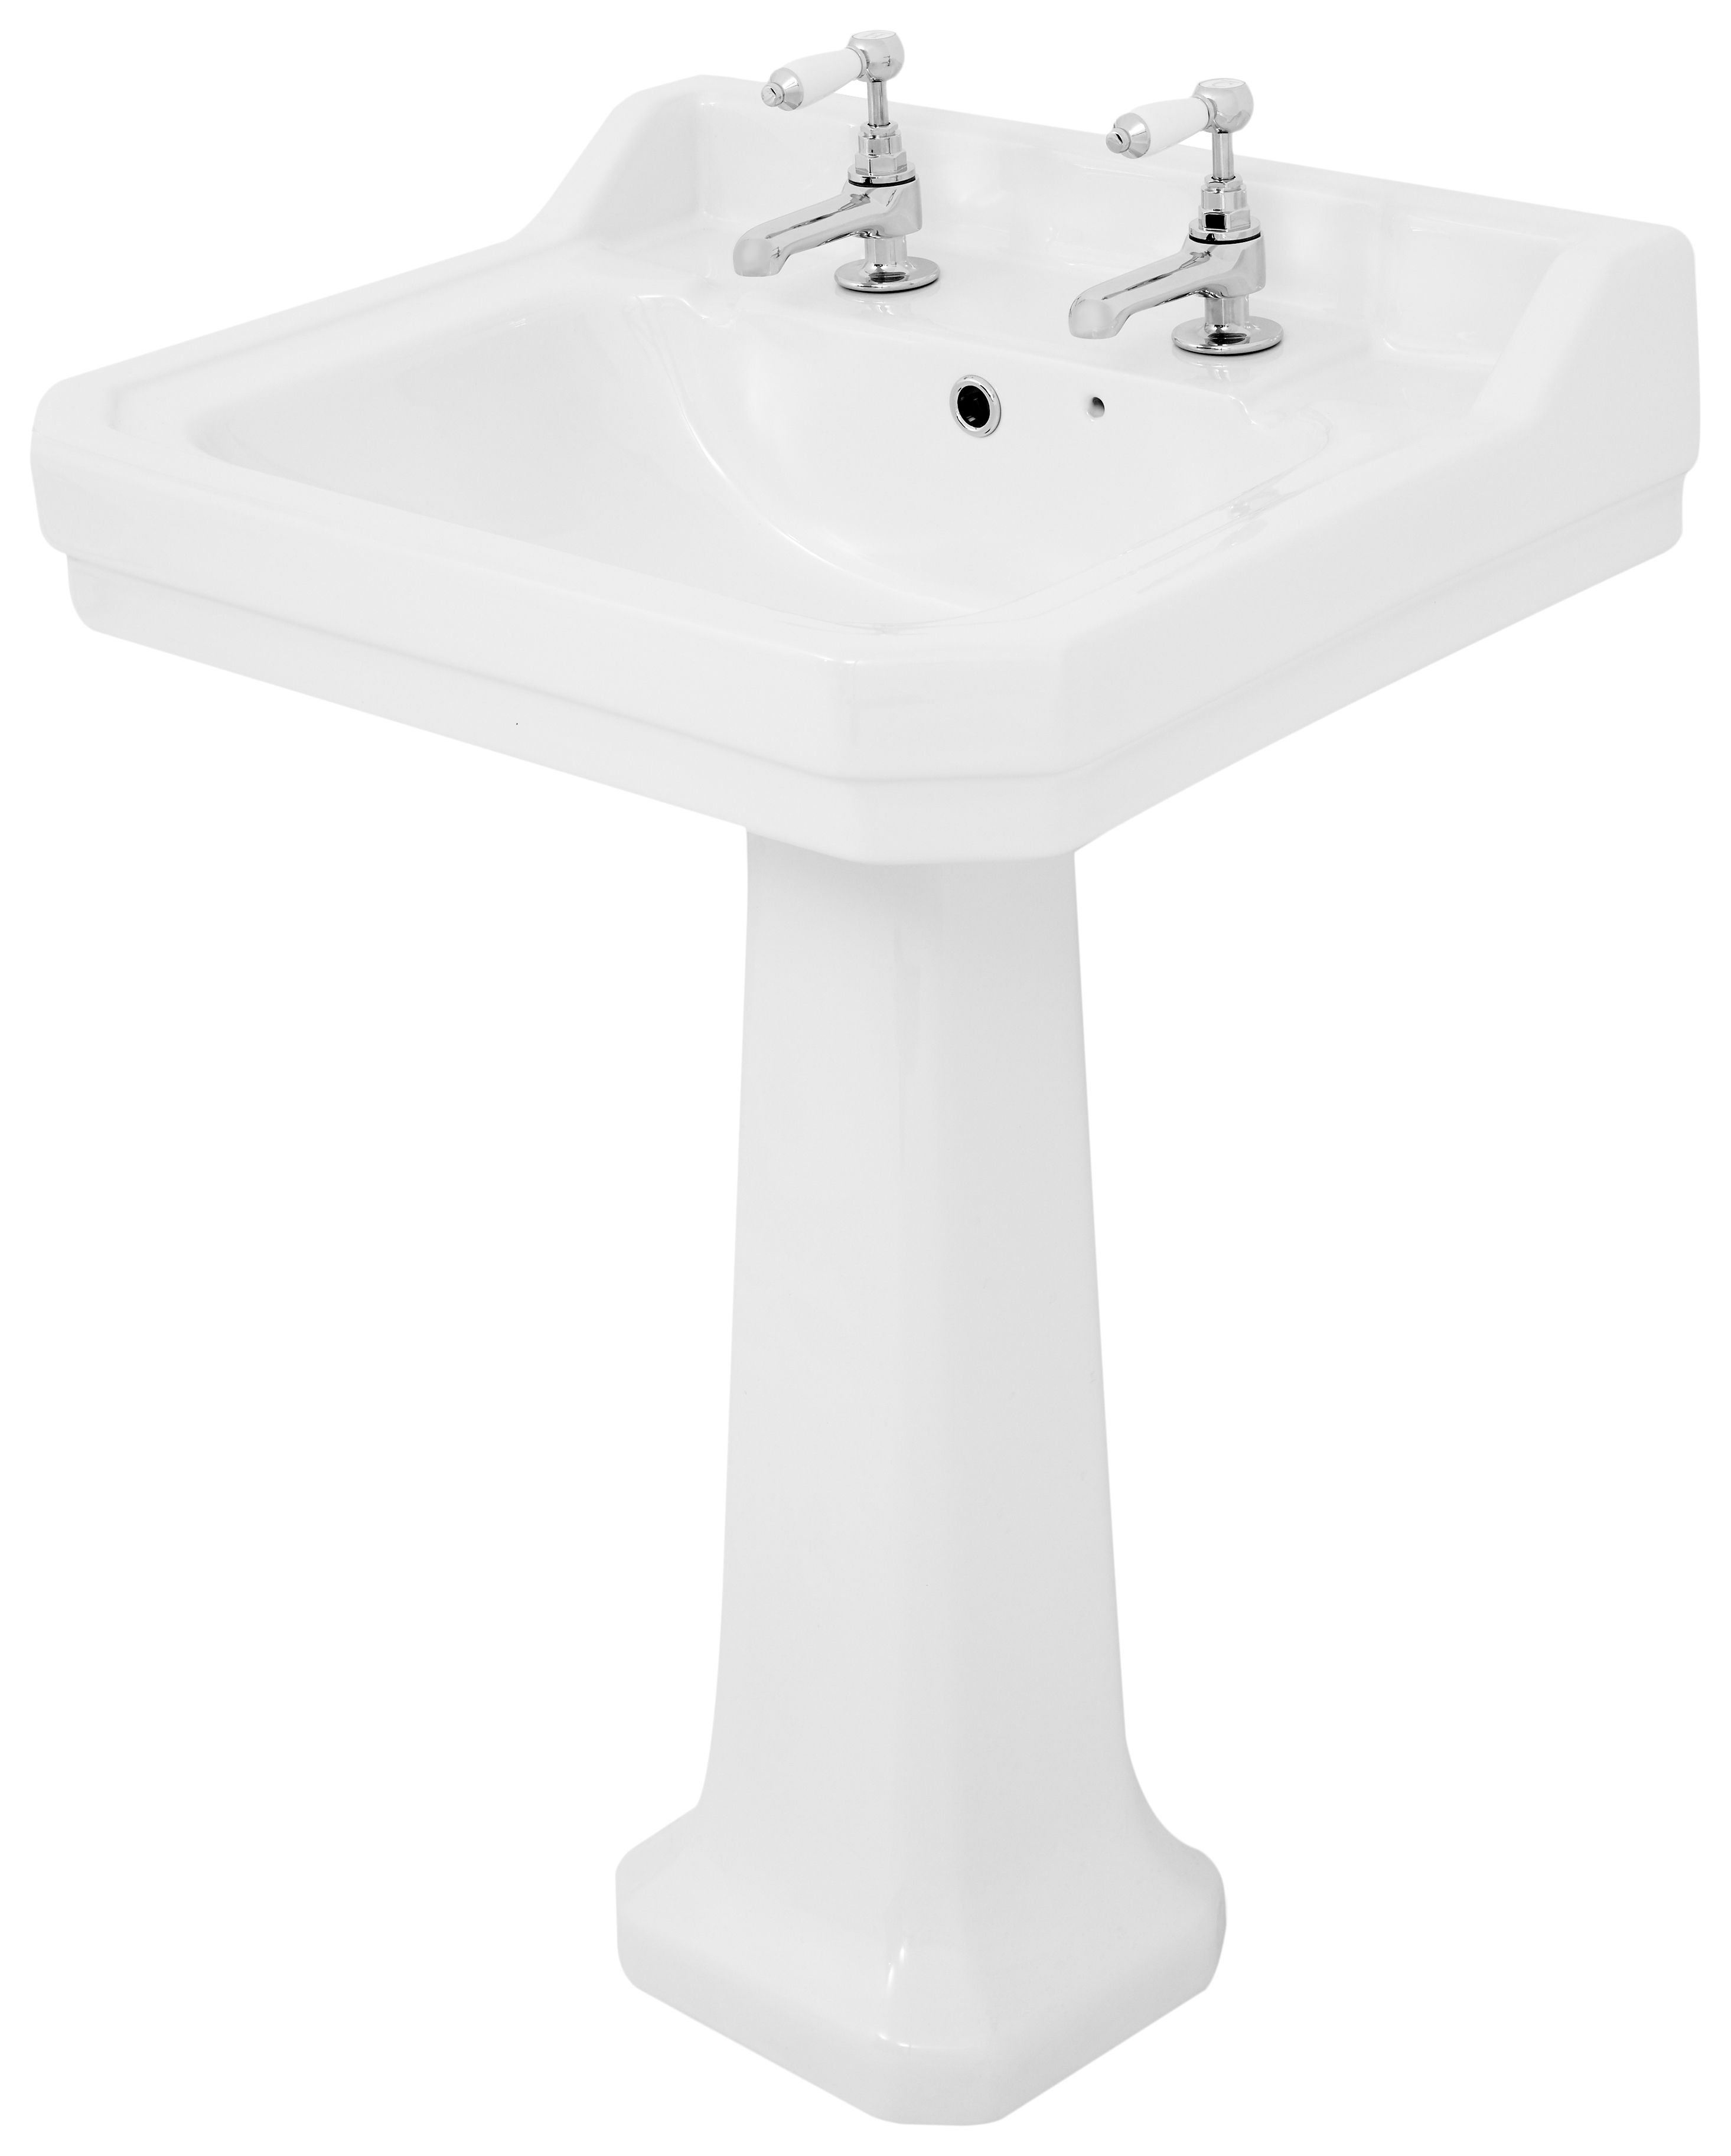 Image of Wickes Oxford Traditional 2 Tap Hole Ceramic Bathroom Basin with Full Pedestal - 550mm